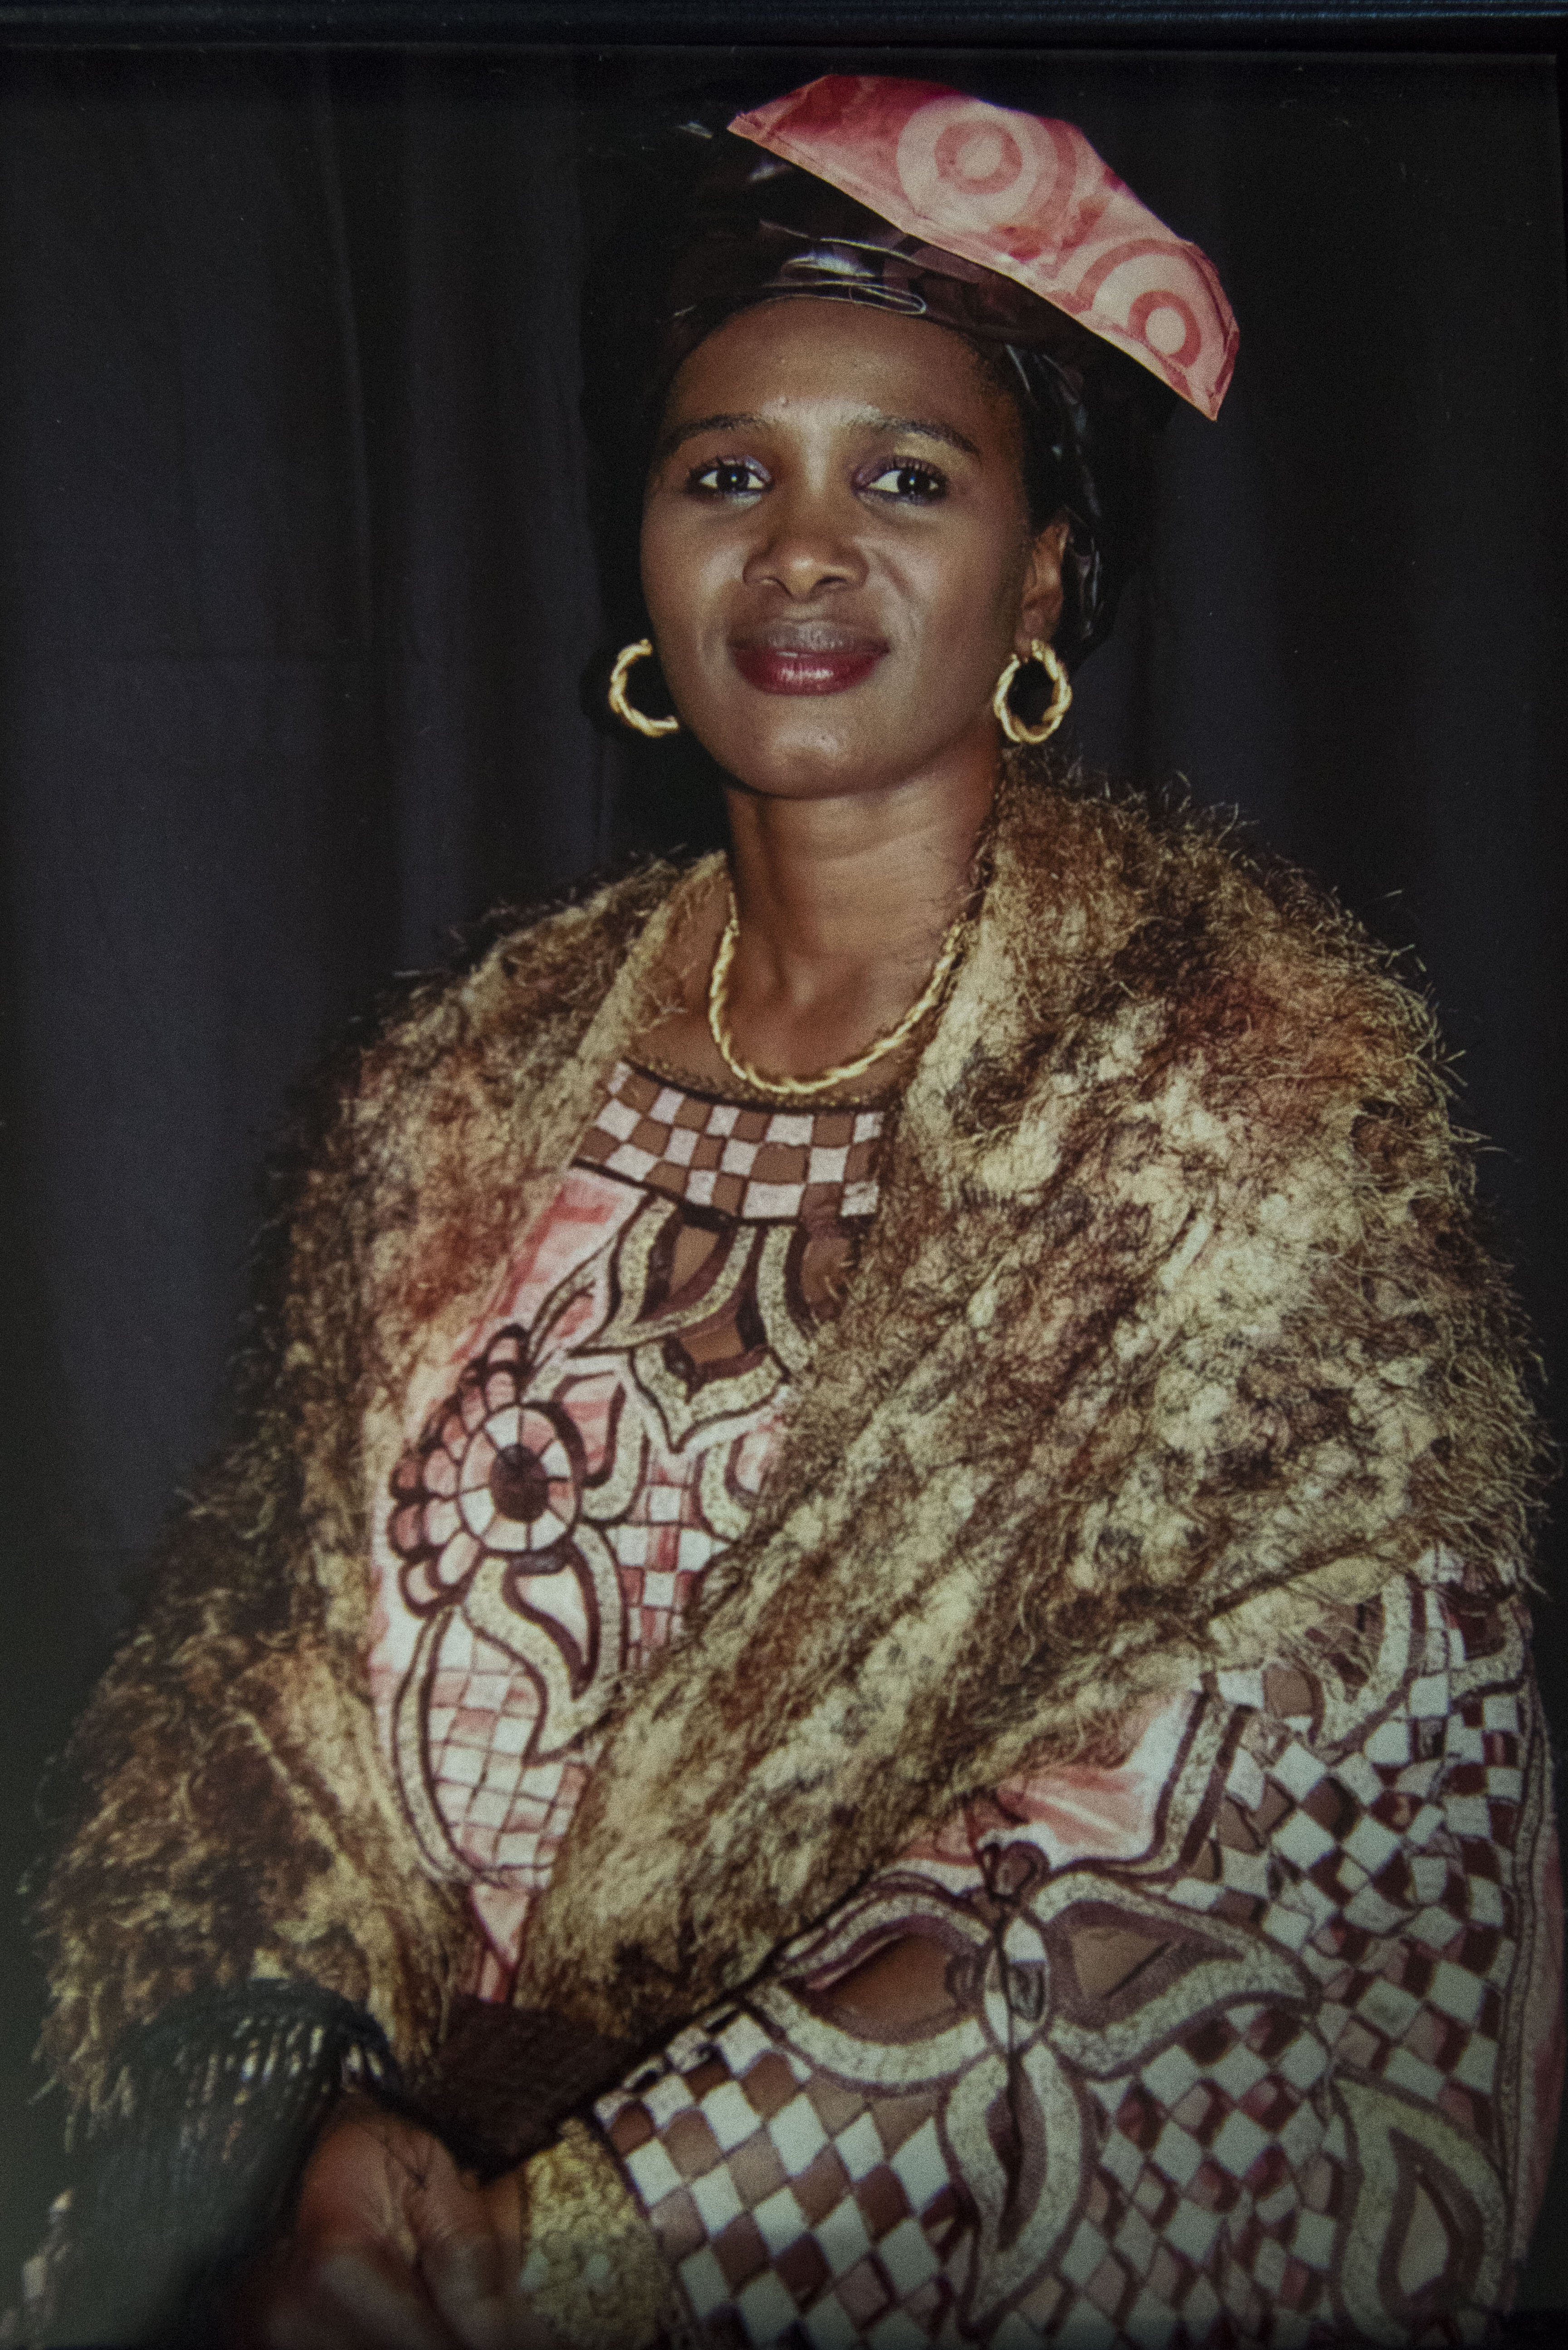 Malik’s mother, Hadja Tounkara, who was visiting her family in Guinea at the time this project was conducted.